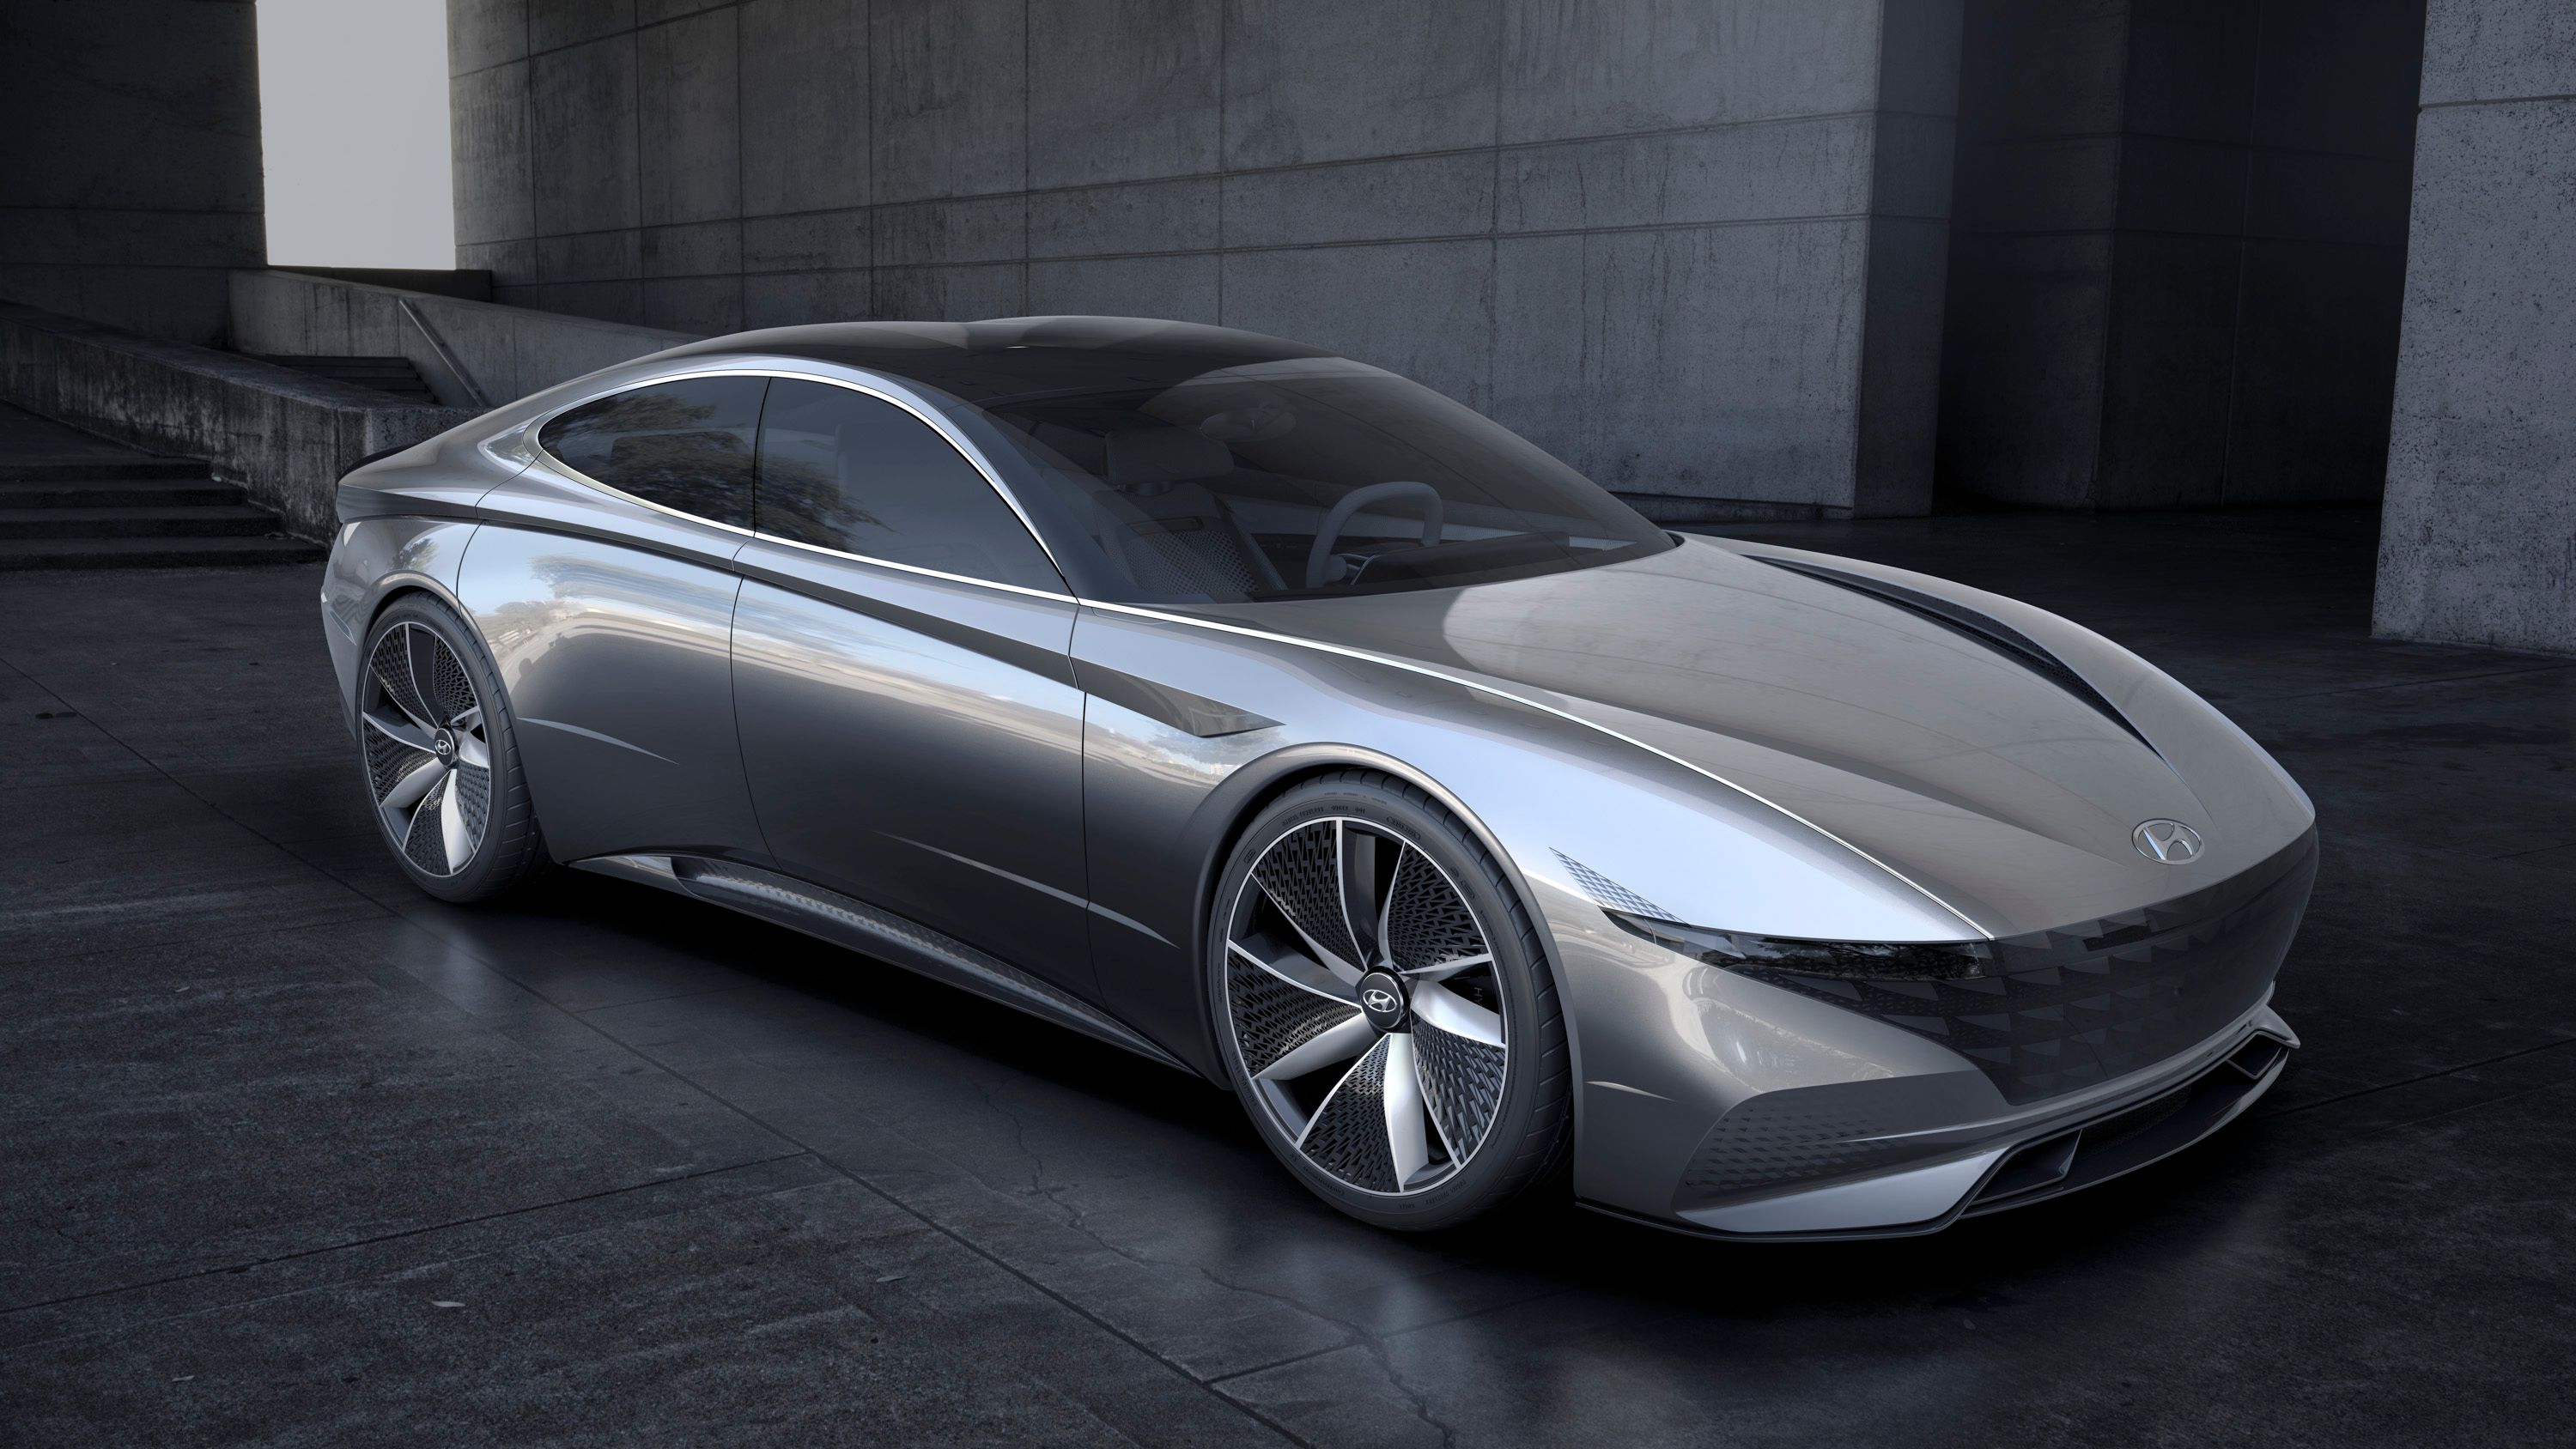 2018 Hyundai Plotting a New Concept; Could Base the Next-Gen Sonata on the Le Fil Rouge